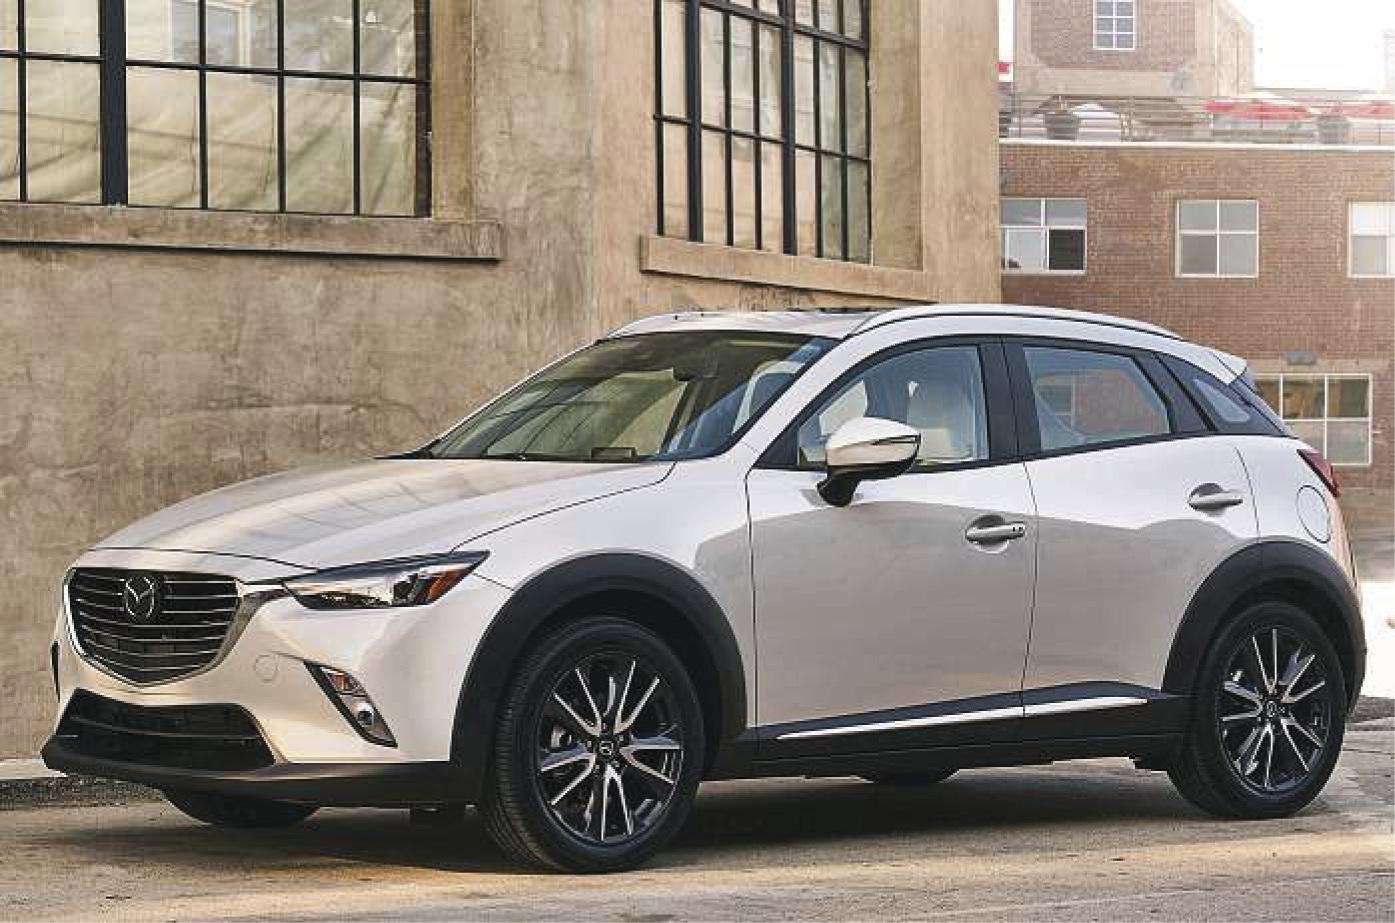 Mazda Cx 3 Small Crossover Gets Interior Engine Upgrades For 19 Houston Chronicle